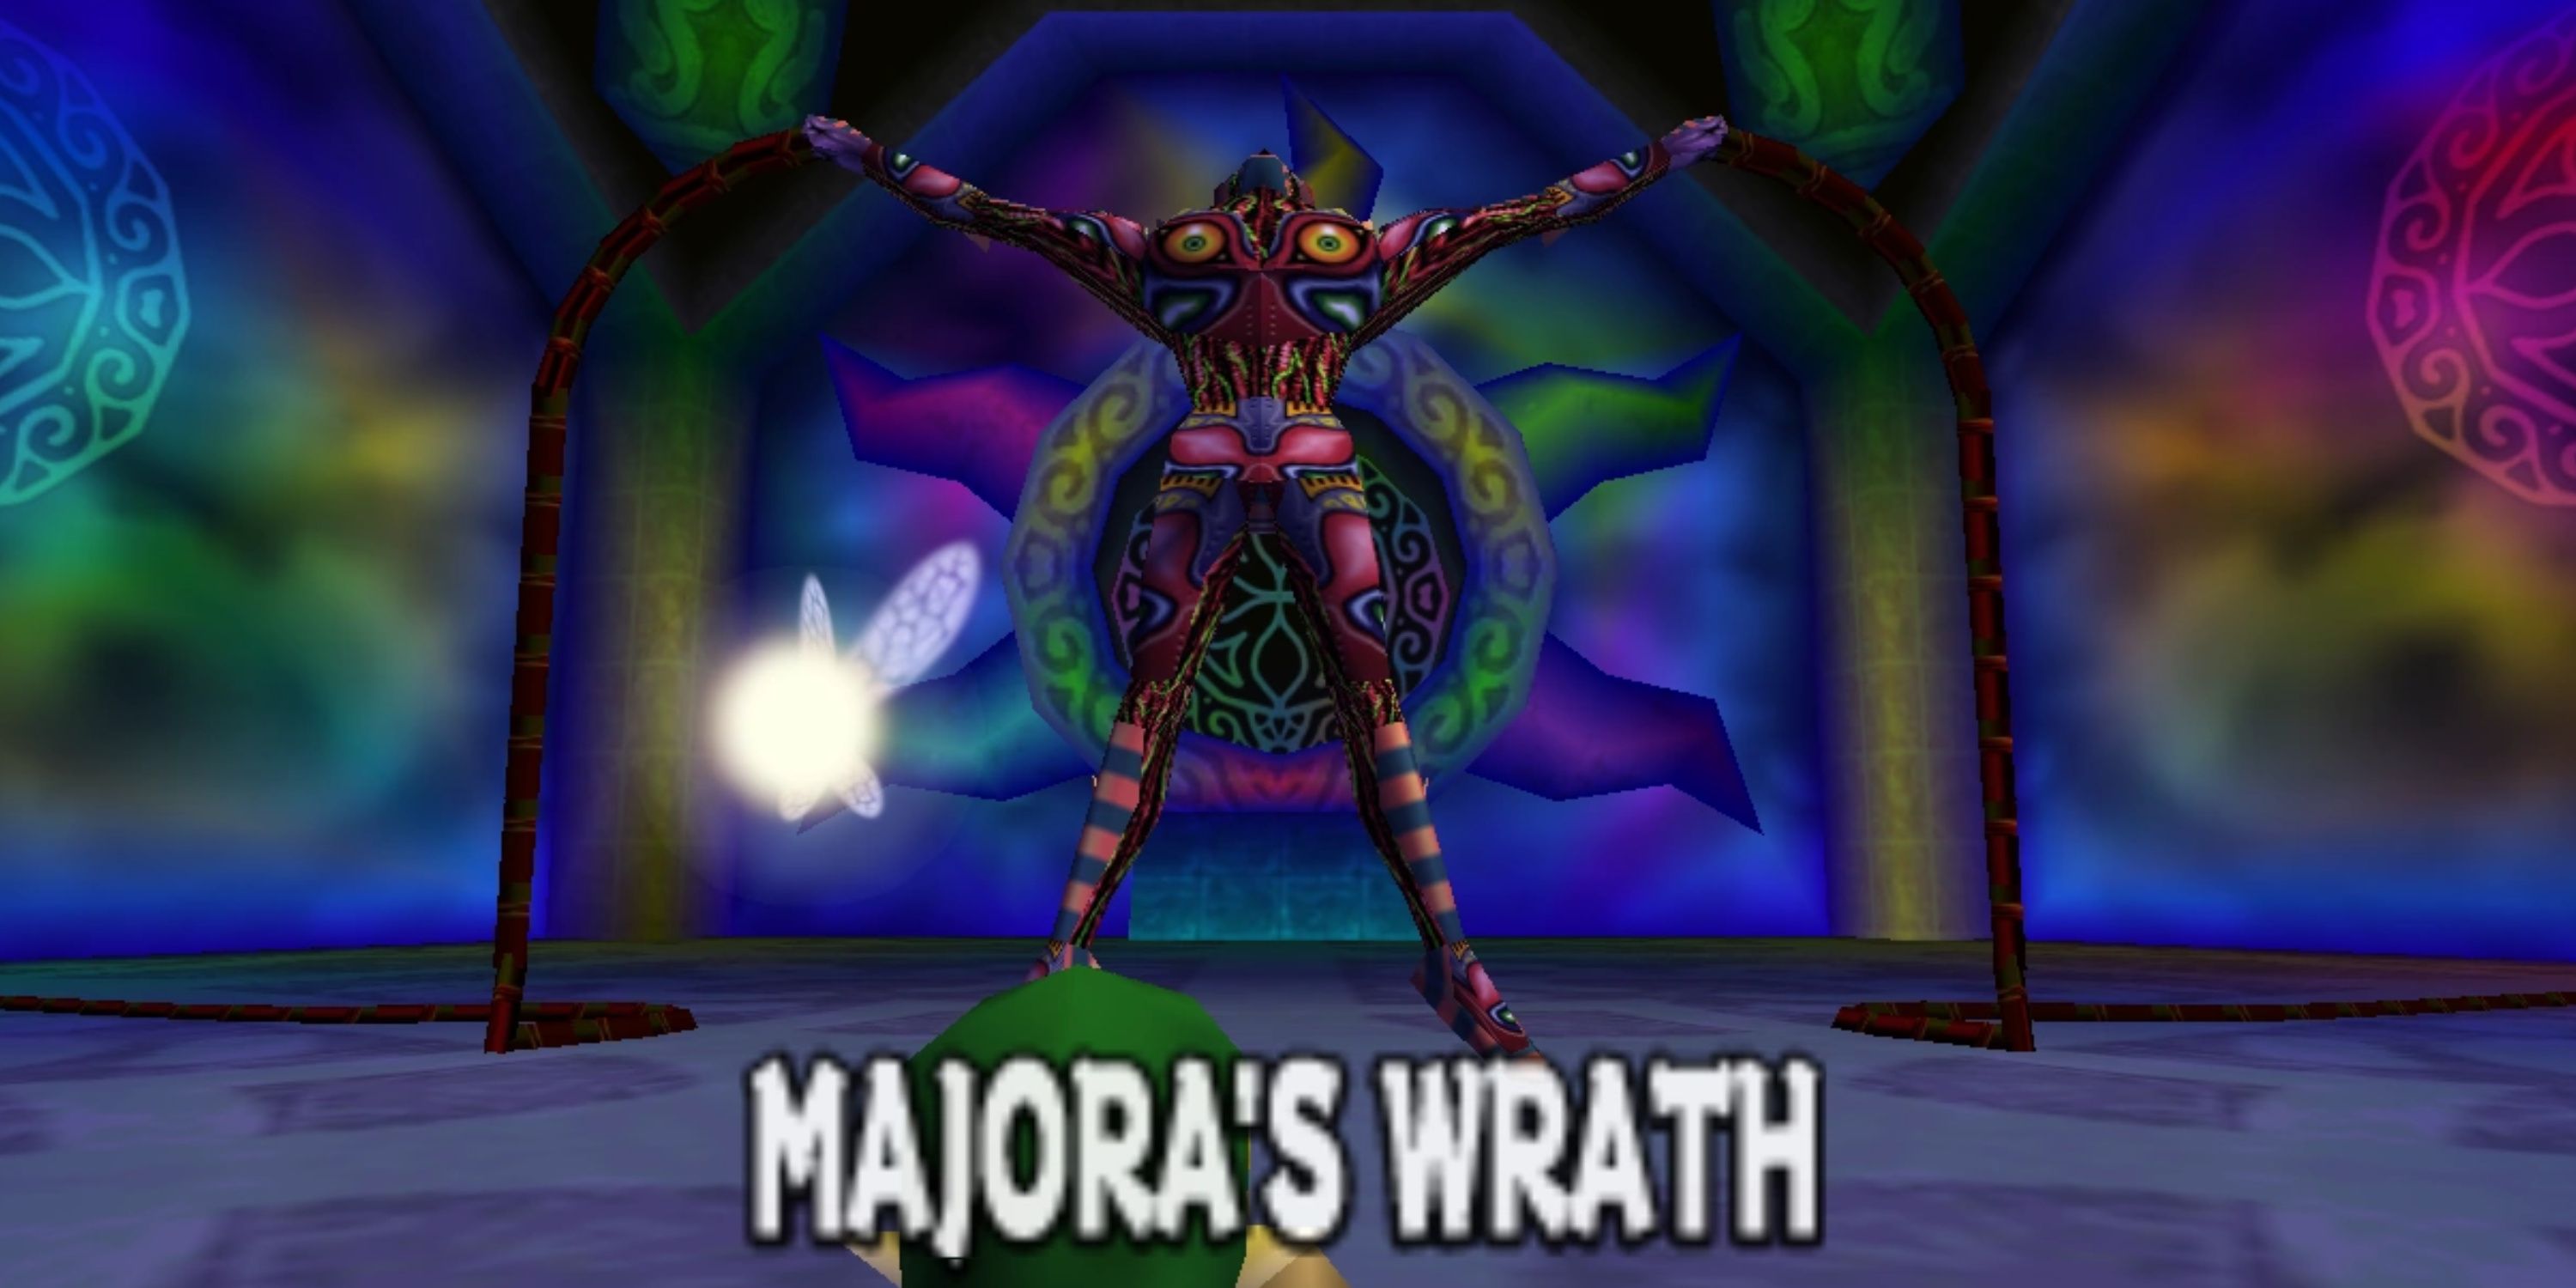 Physical form of Majora's Mask